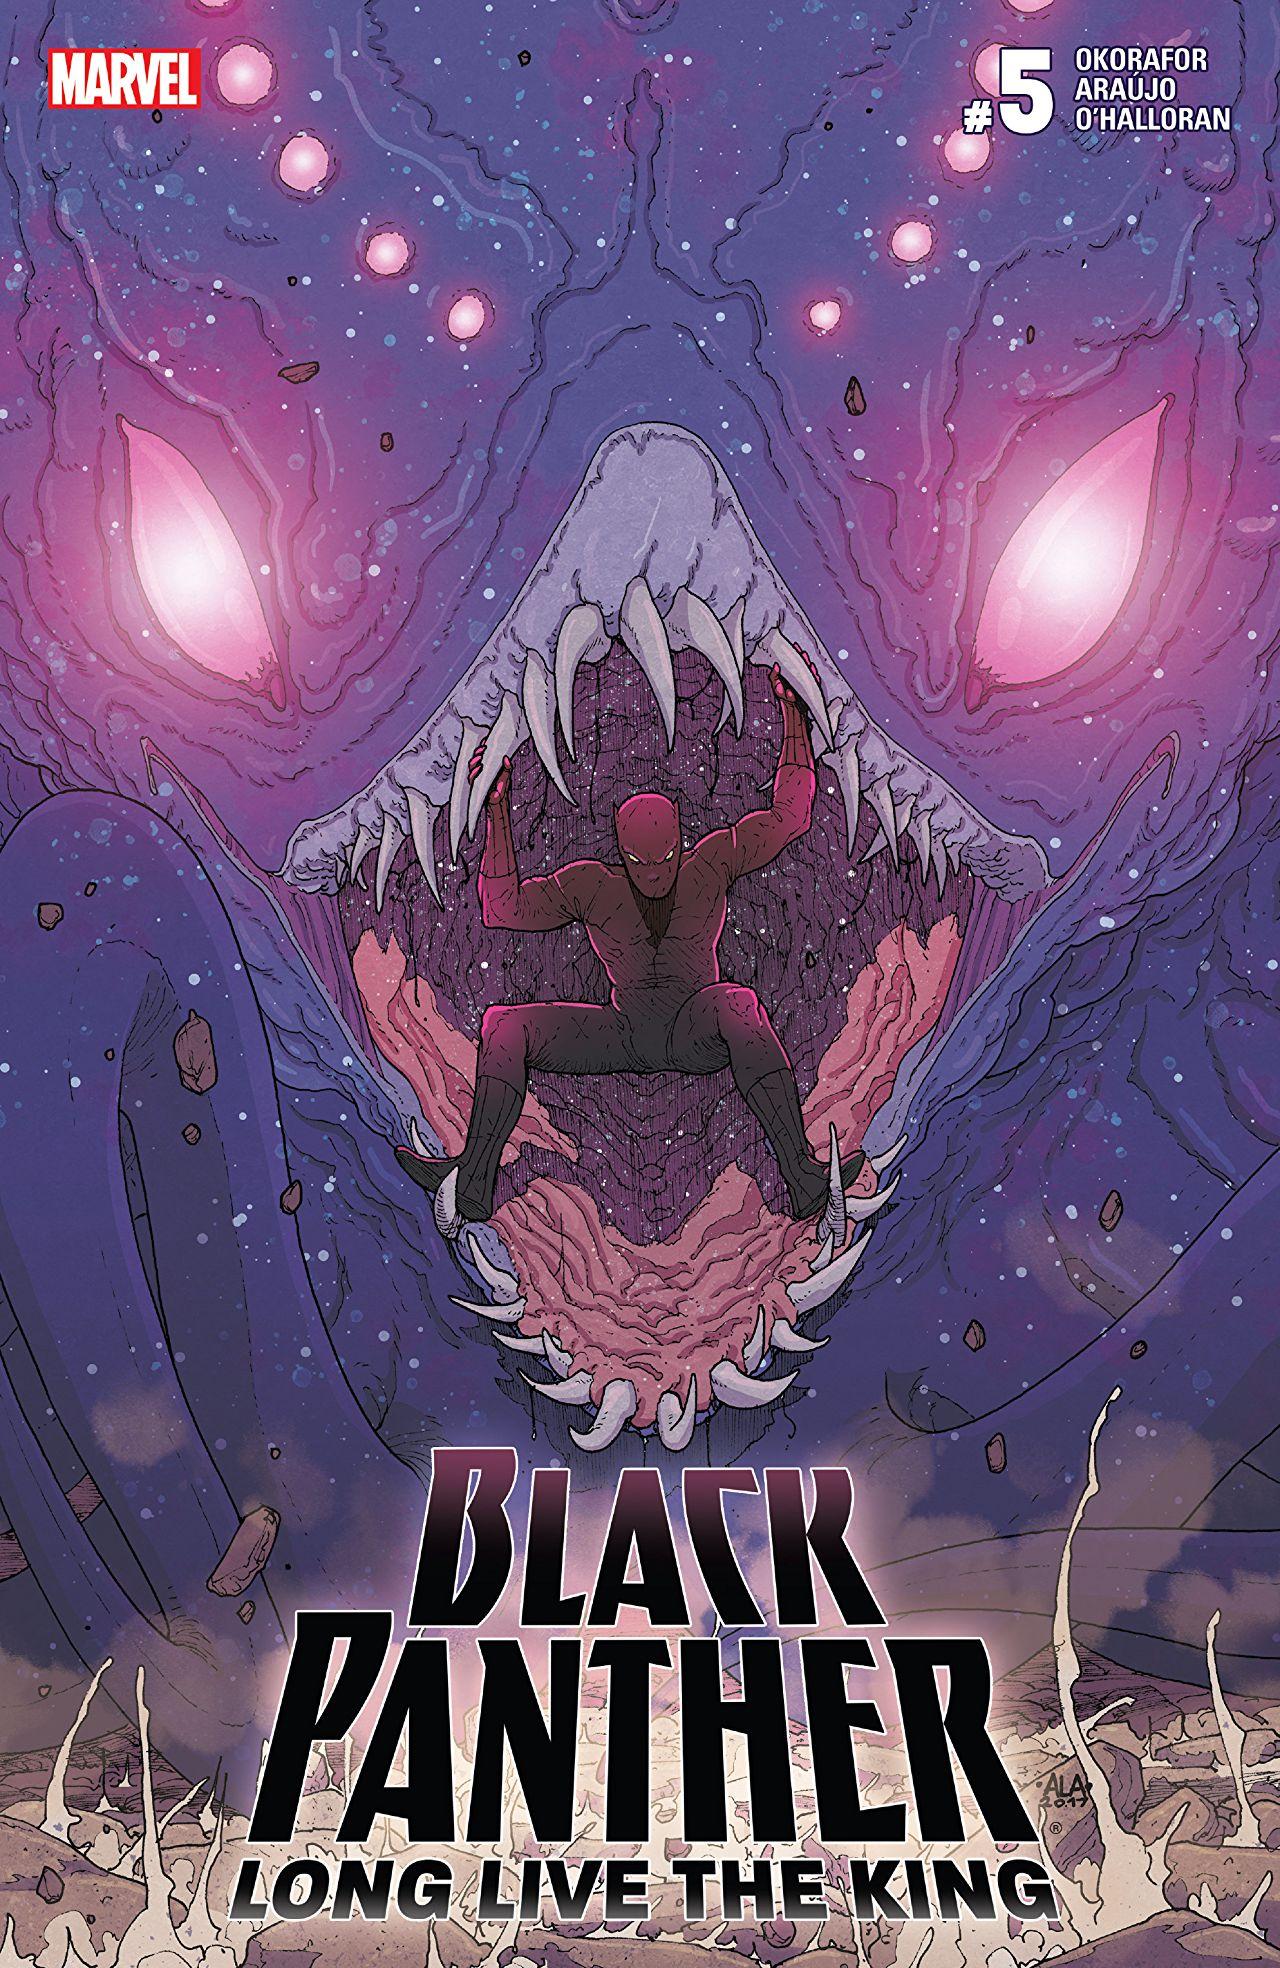 Black Panther: Long Live The King Vol. 1 #5